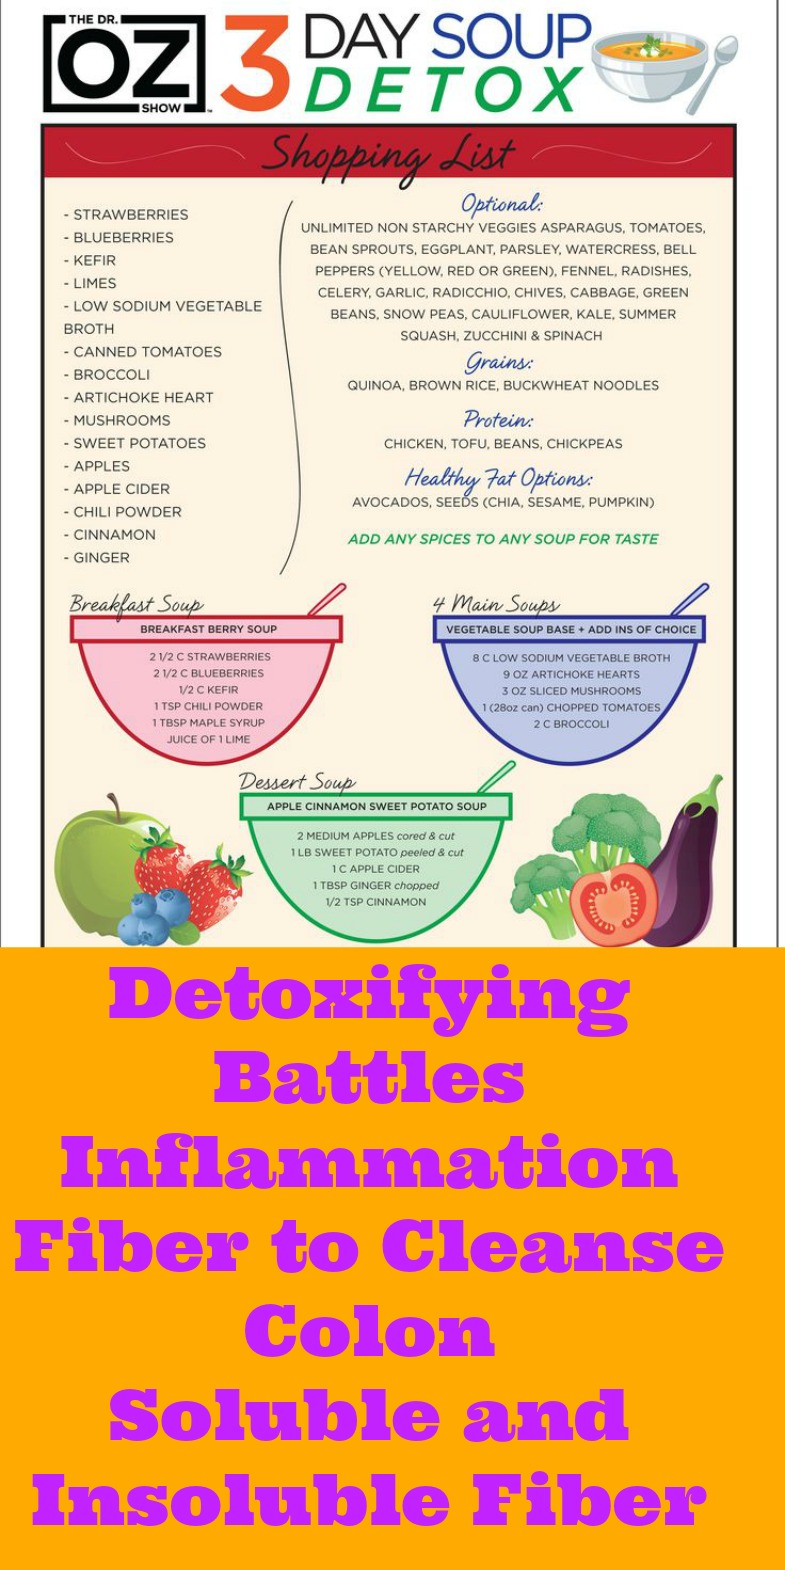 You need to try the 3 Day Dr. Oz Detox Soup to relieve bloating, weight loss, to flush fat,cleanse your system and cleanse your liver. 